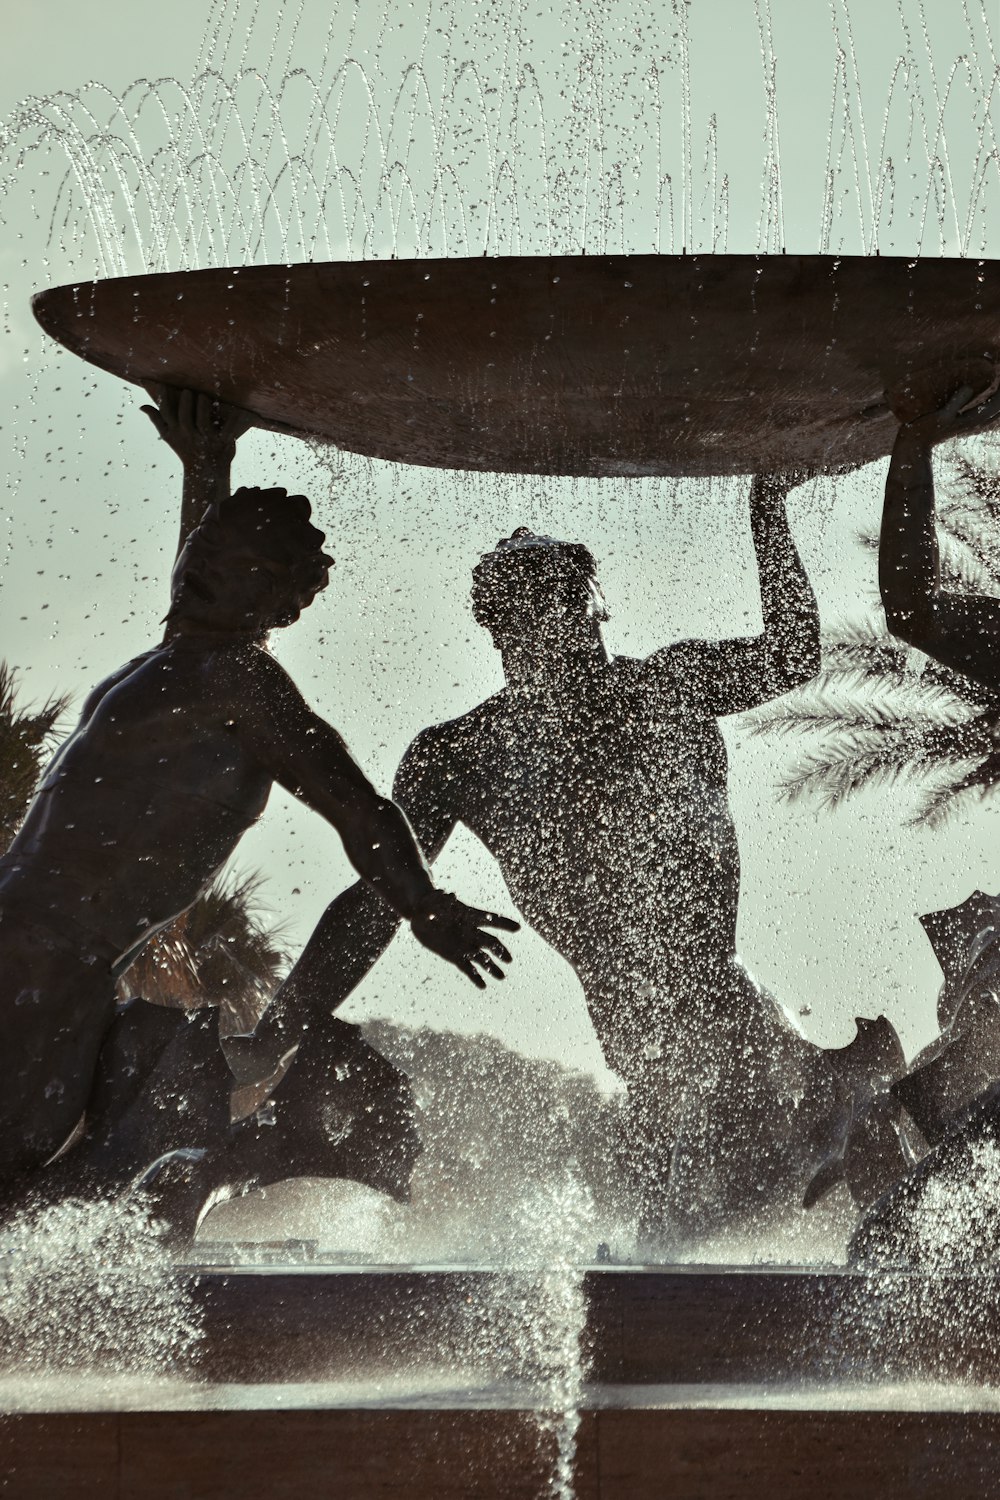 a group of people playing in a fountain